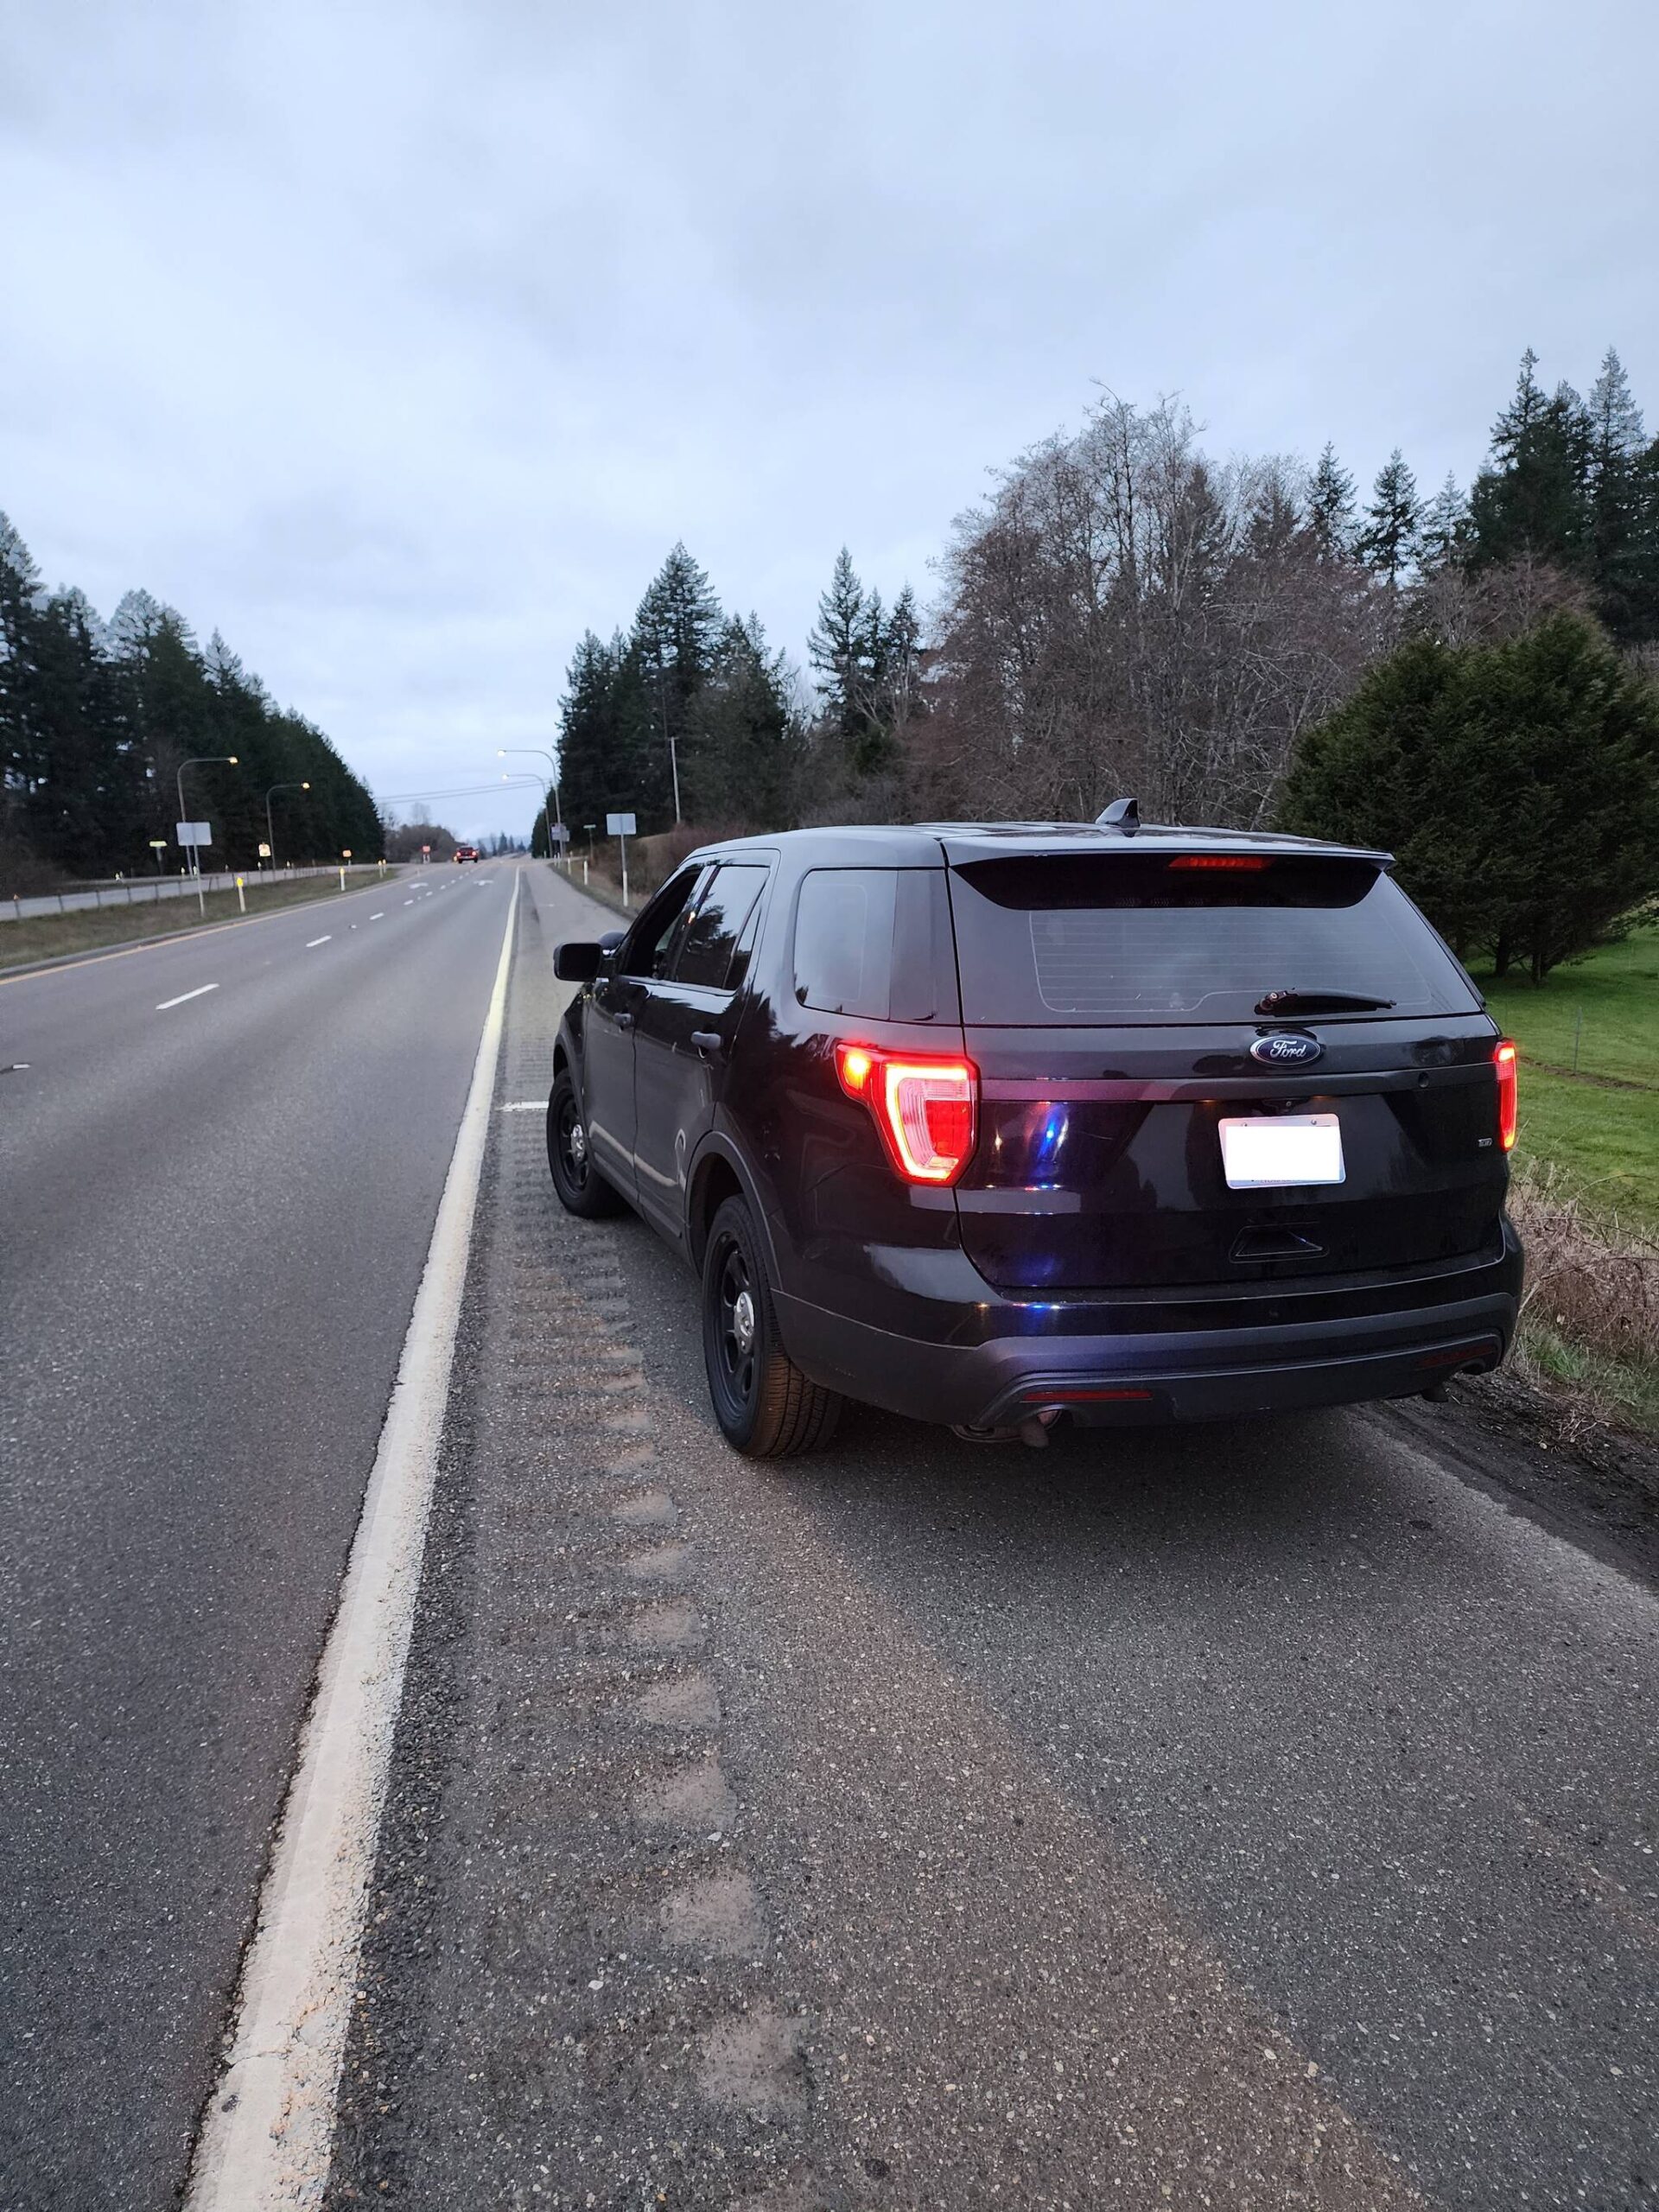 A trooper from the Washington State Patrol arrested a man Saturday morning near Elma for impersonating a law enforcement officer in a vehicle made to look like a patrol car. (Courtesy photo / Washington State Patrol)